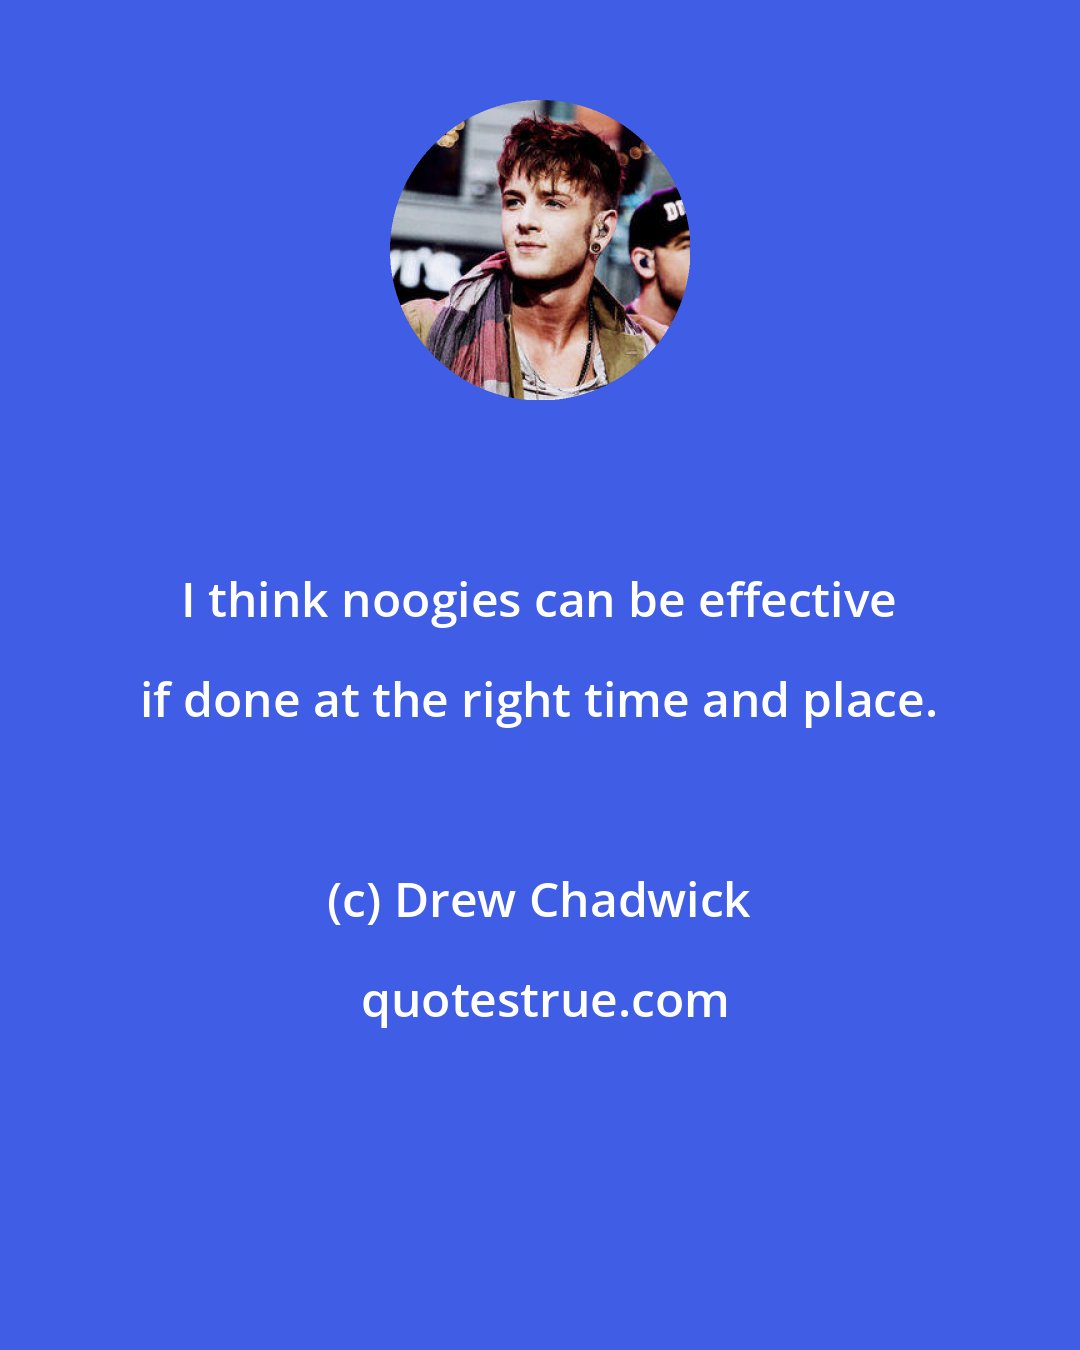 Drew Chadwick: I think noogies can be effective if done at the right time and place.